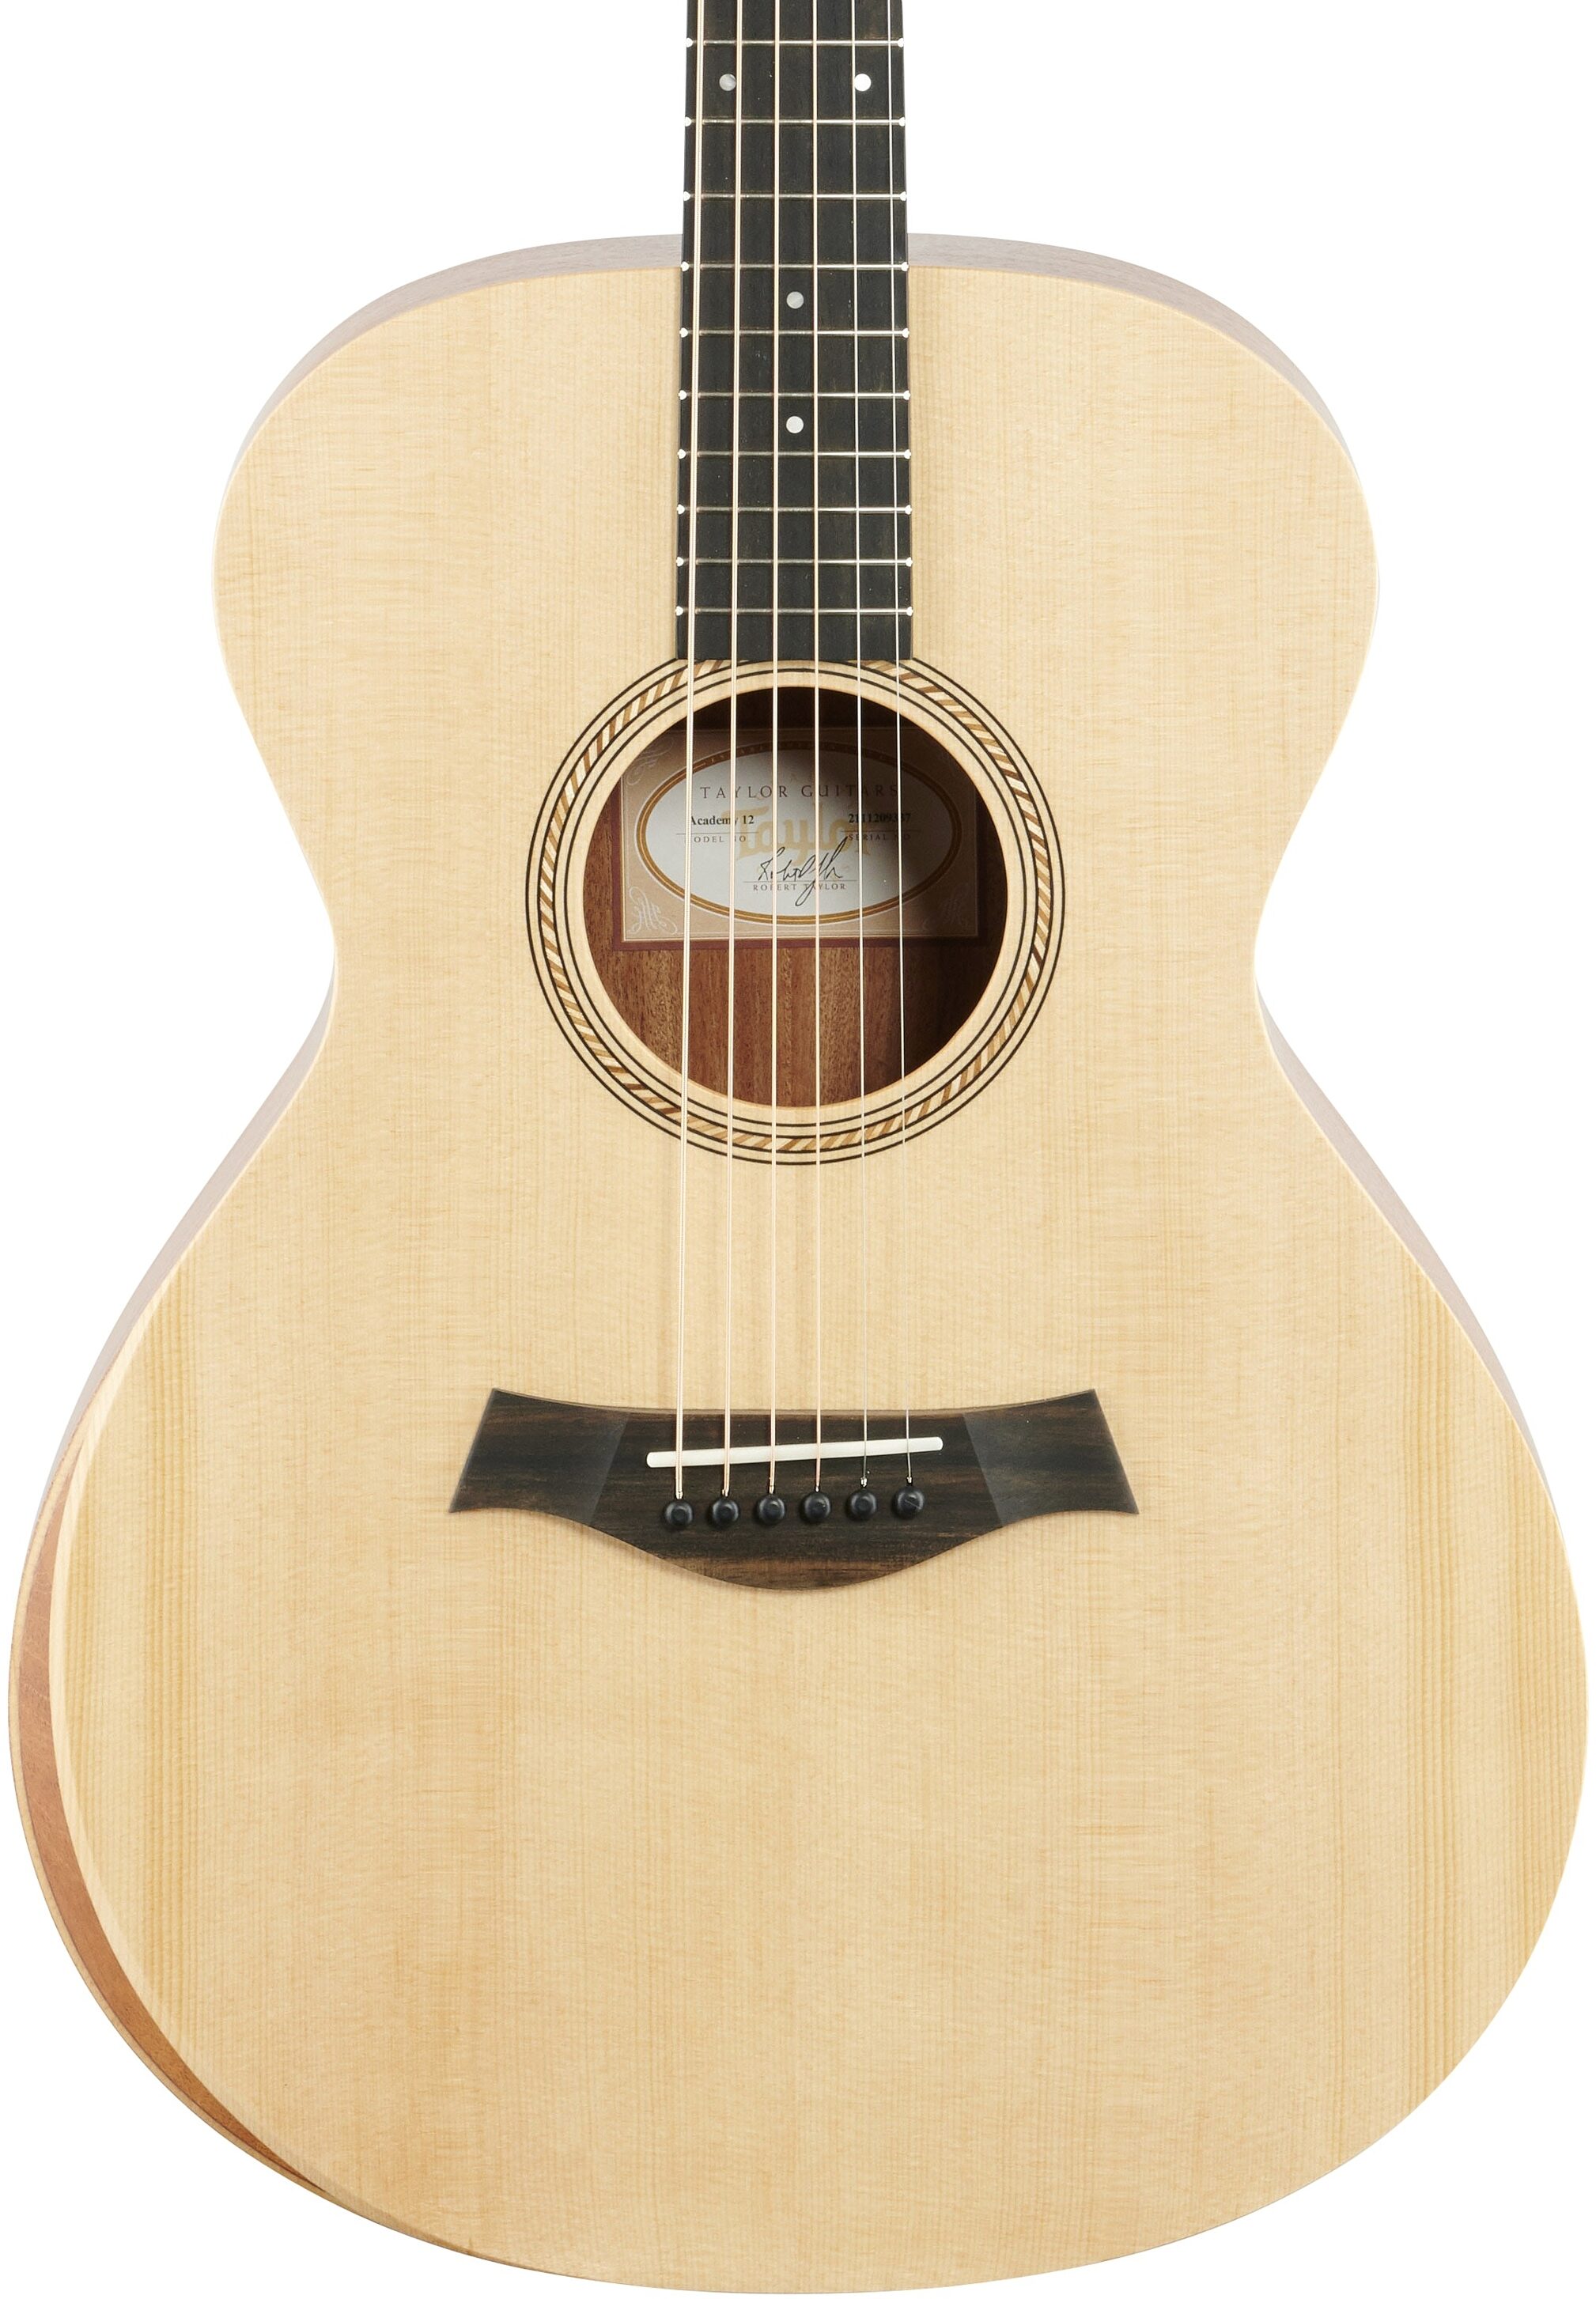 Taylor A12 Academy Series Grand Concert Acoustic Guitar (with Gig Bag)